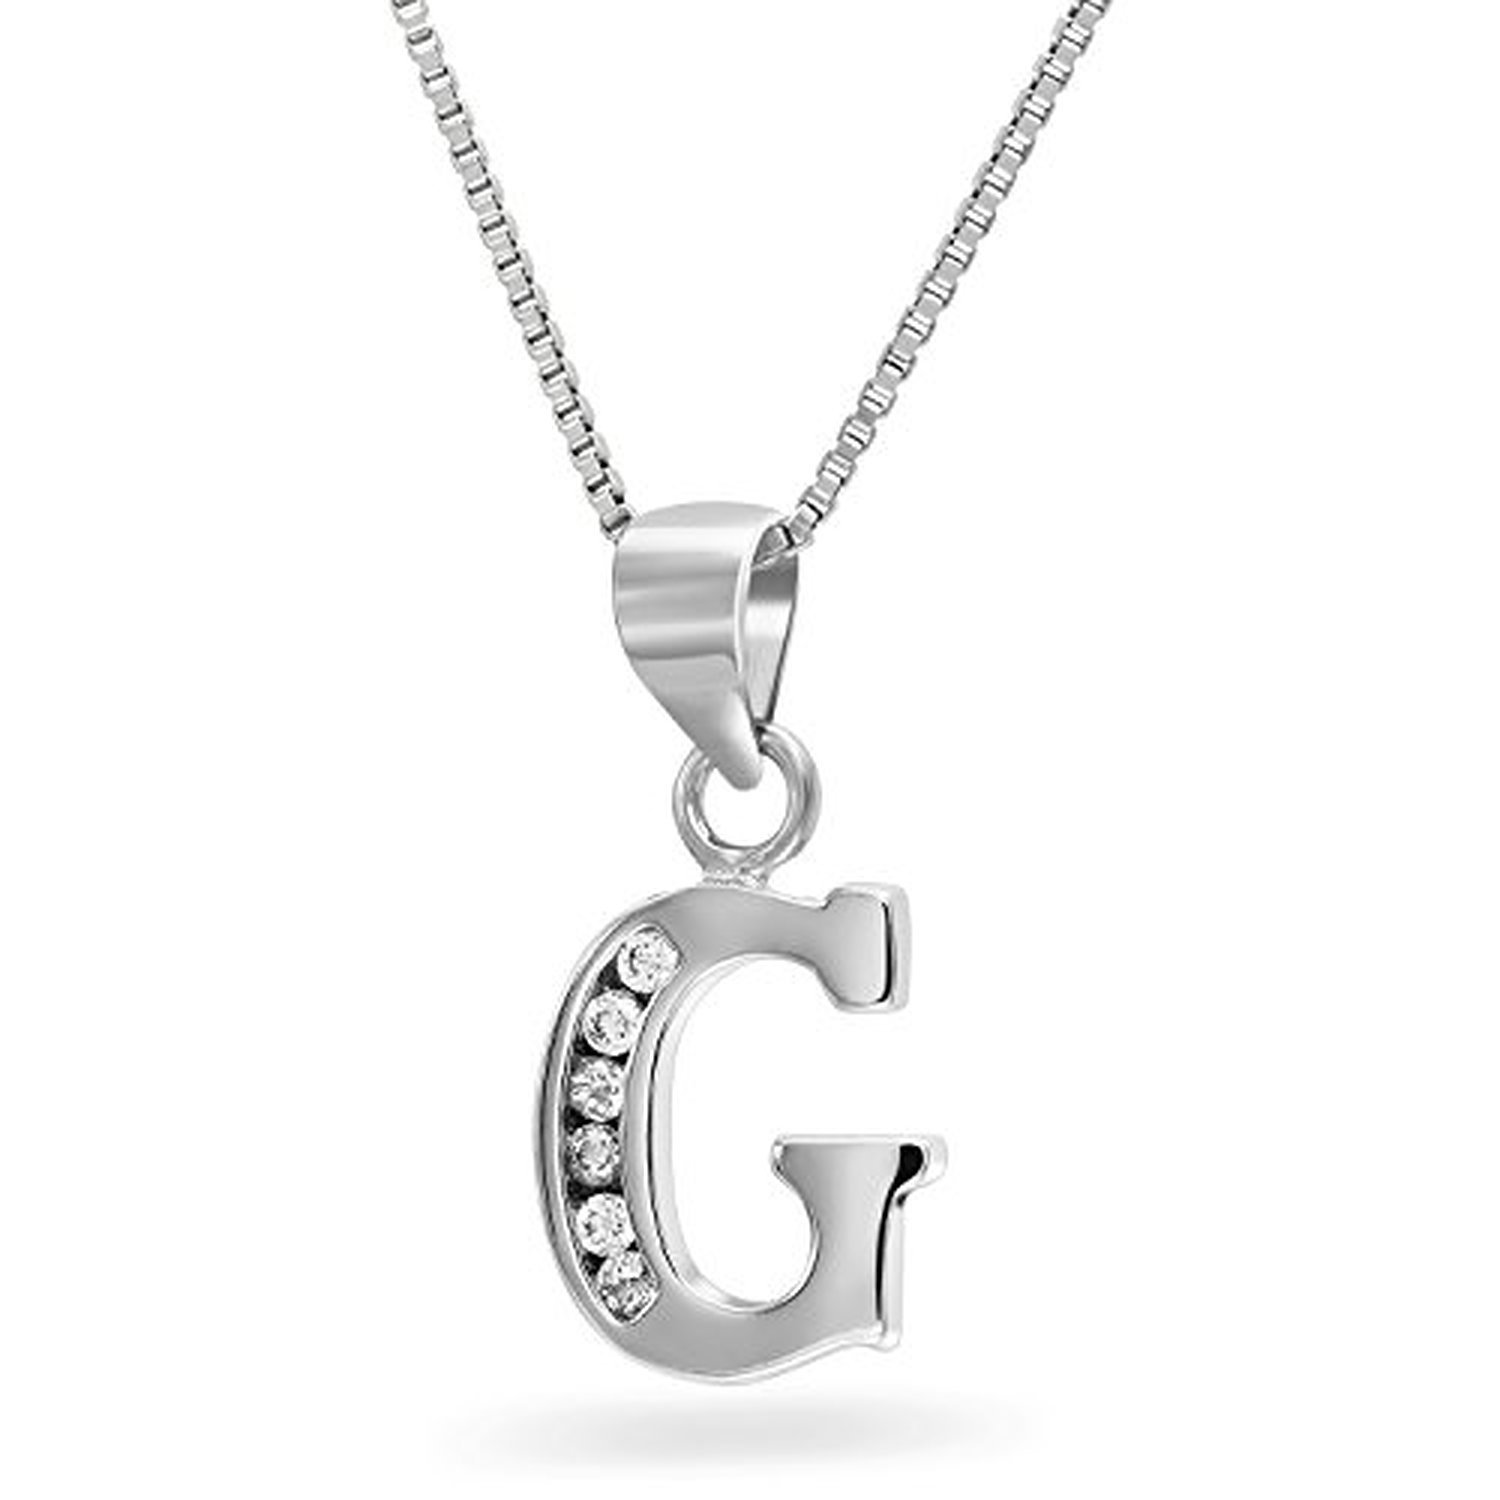 Sterling Silver Cubic Zirconia CZ Initial Pendant Necklace, 18